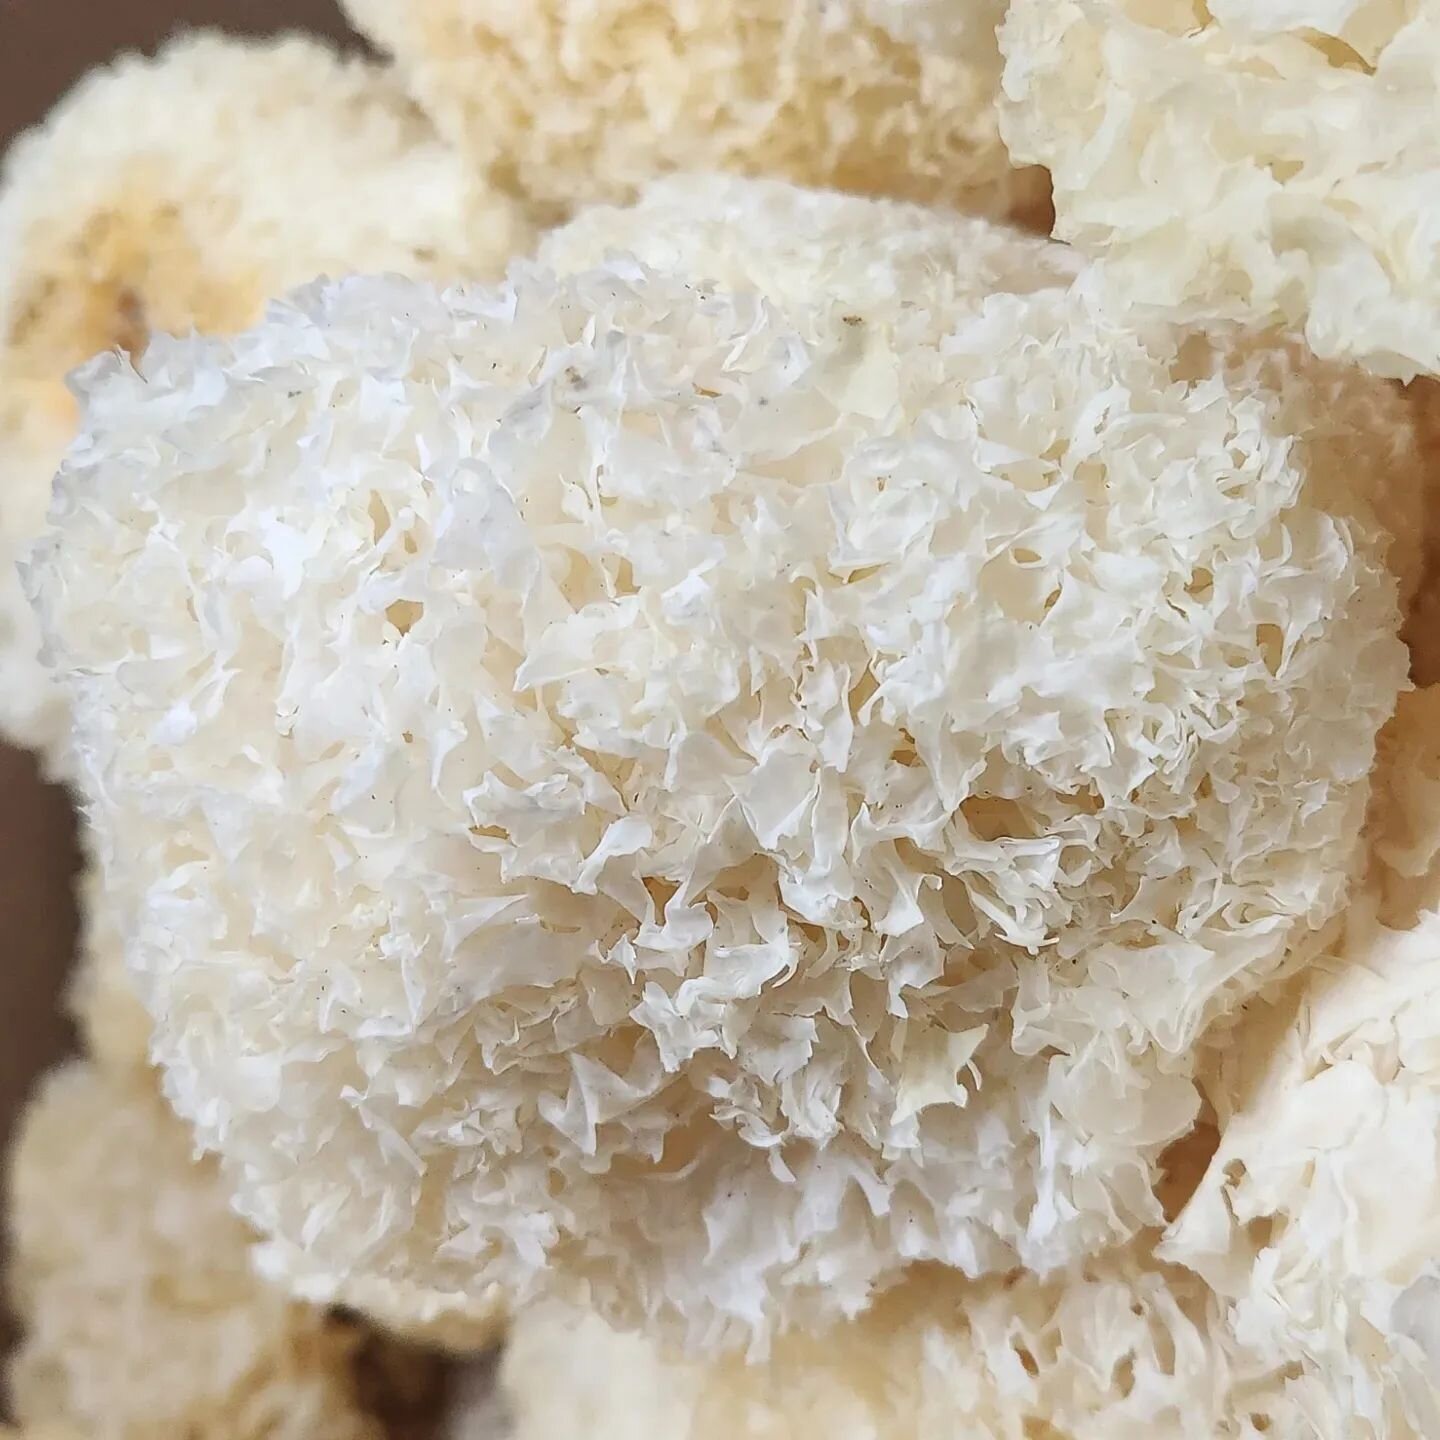 First full batch of Snow Fungus in the books and listed on the website! I might be more excited by this then even cordyceps! If youre not familiar, the polysaccharides and phenolics in Tremella Fuciformis are a boon to the natural medicine world. Cho